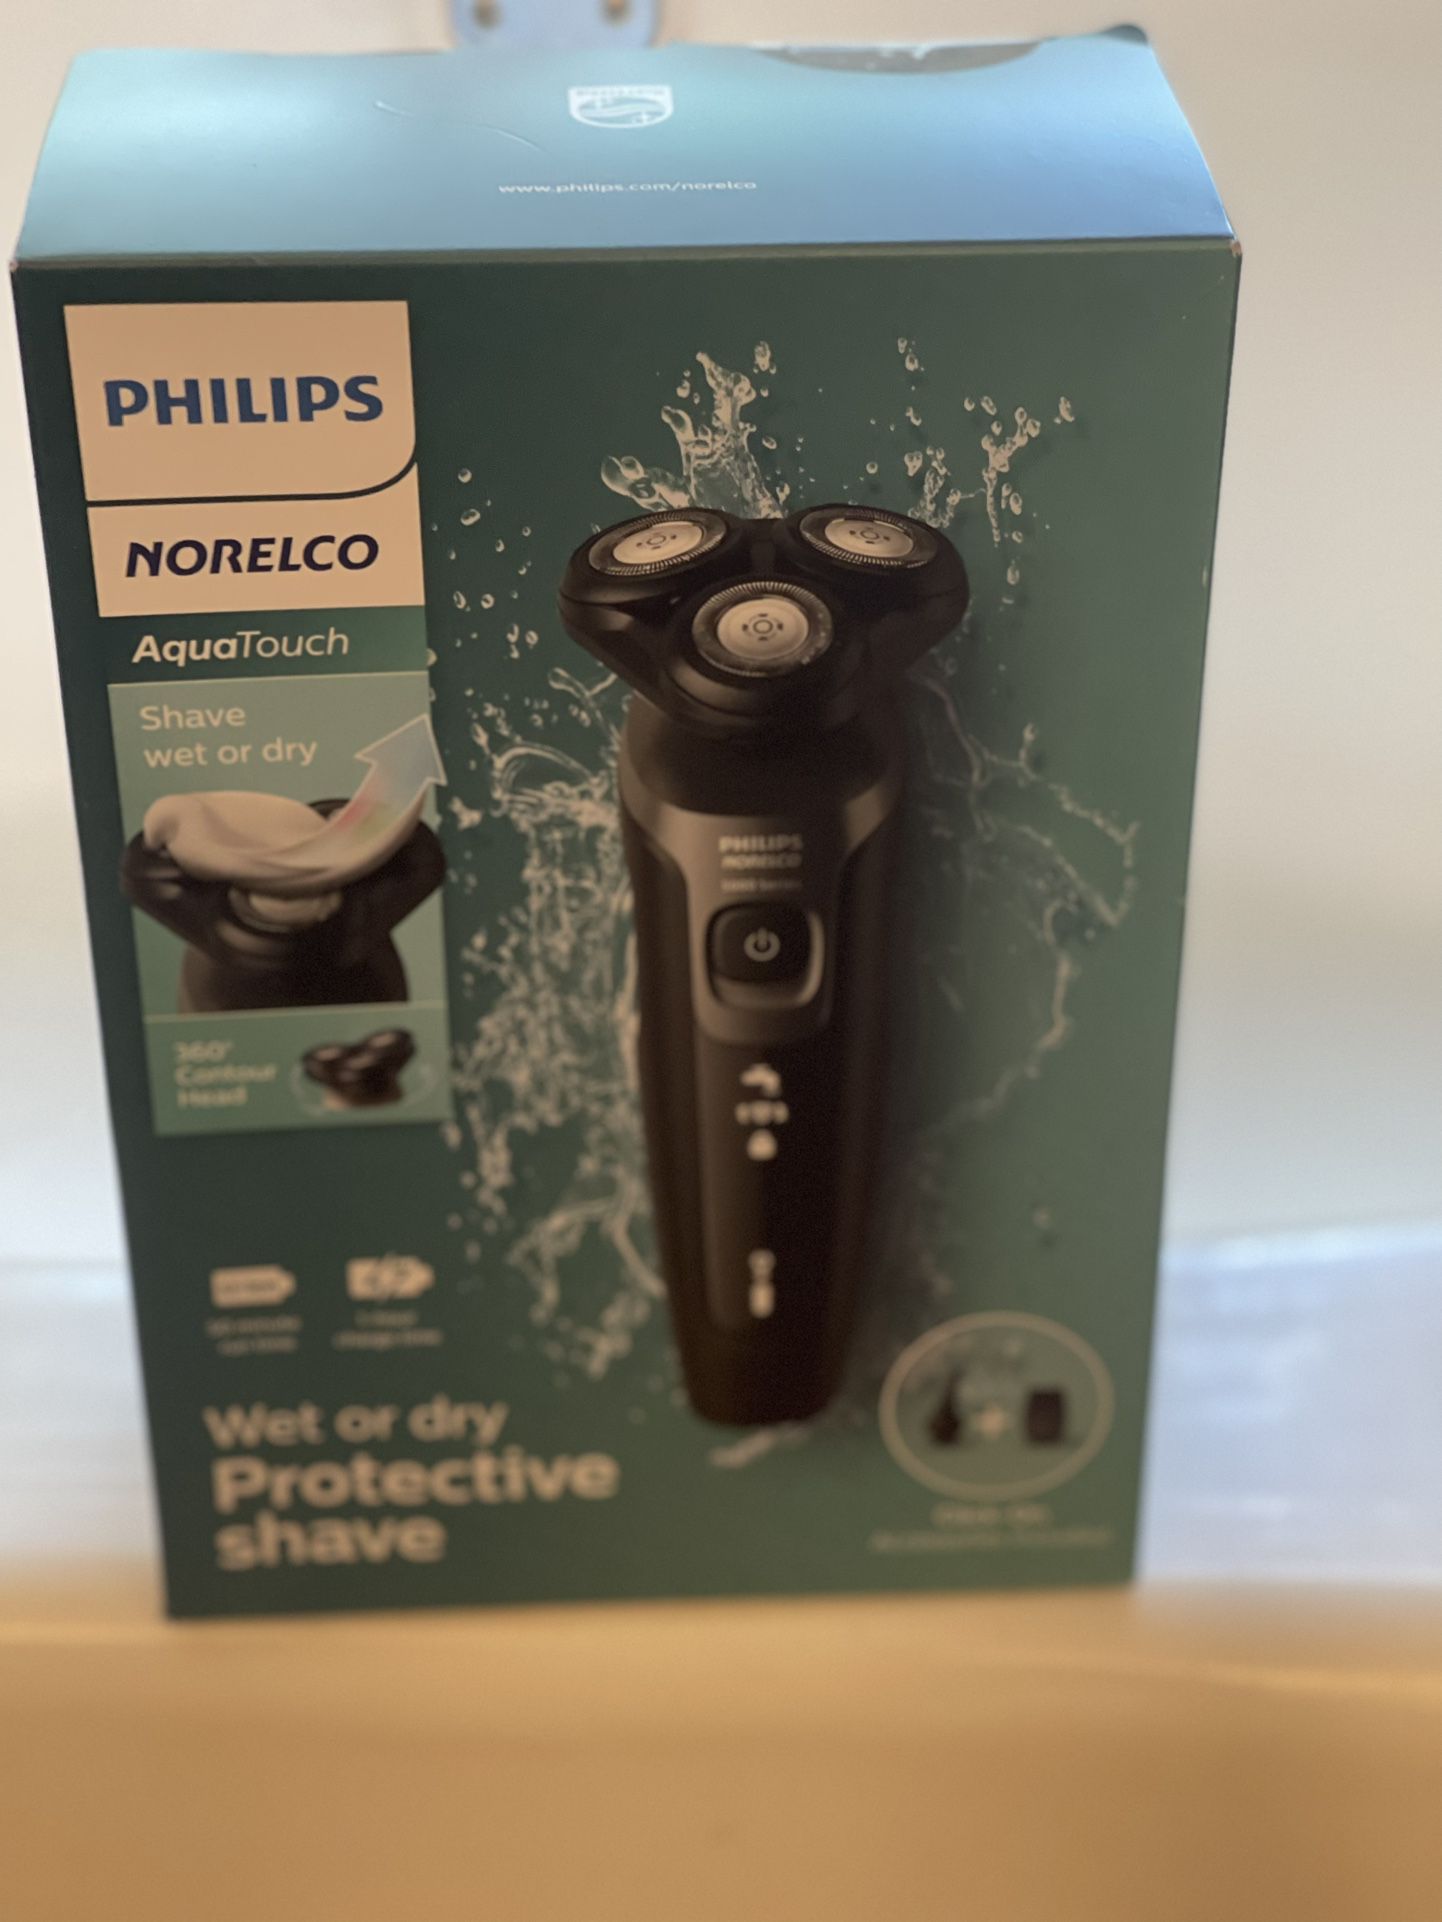 PHILIPS Norelco Electric Shaver S5966/96 - AquaTouch Wet/Dry